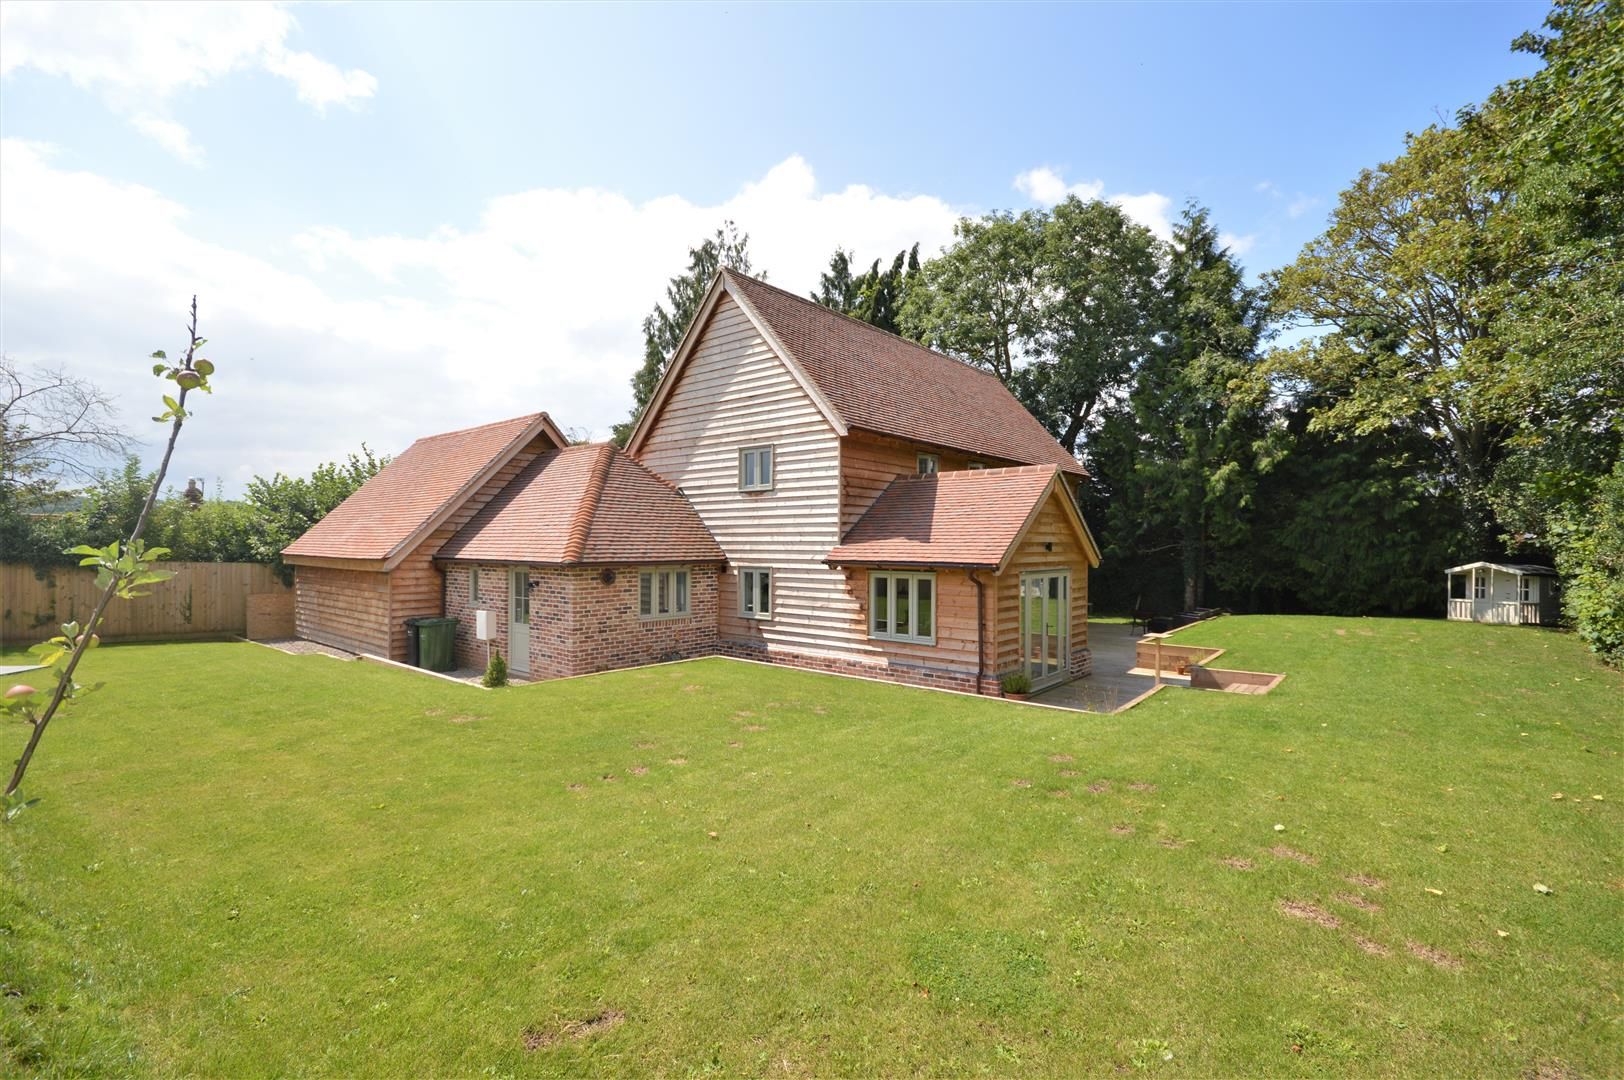 4 bed detached for sale in Bodenham  - Property Image 12